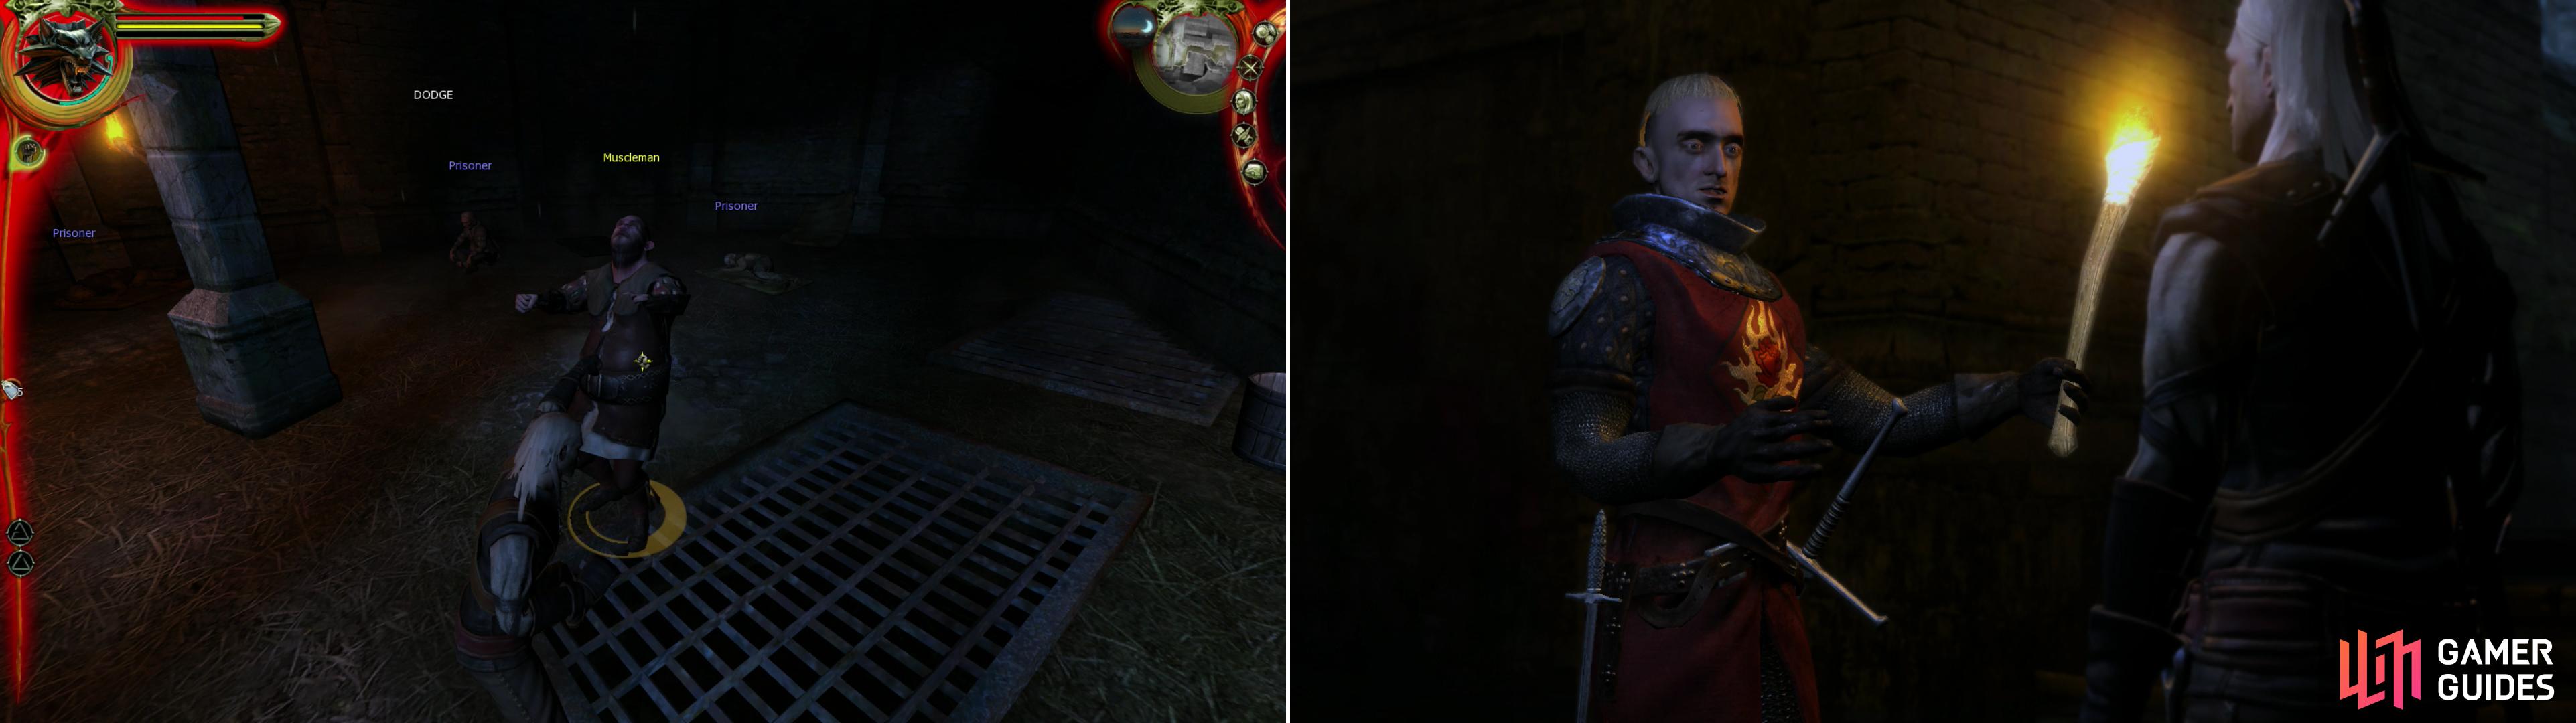 Defeat the Muscleman in fisticuffs to win the right to hunt the Cockatrice (left). In the sewers you'll meet Siegfried, a valorous knight with noble ambitions… if a bit naïve (right).